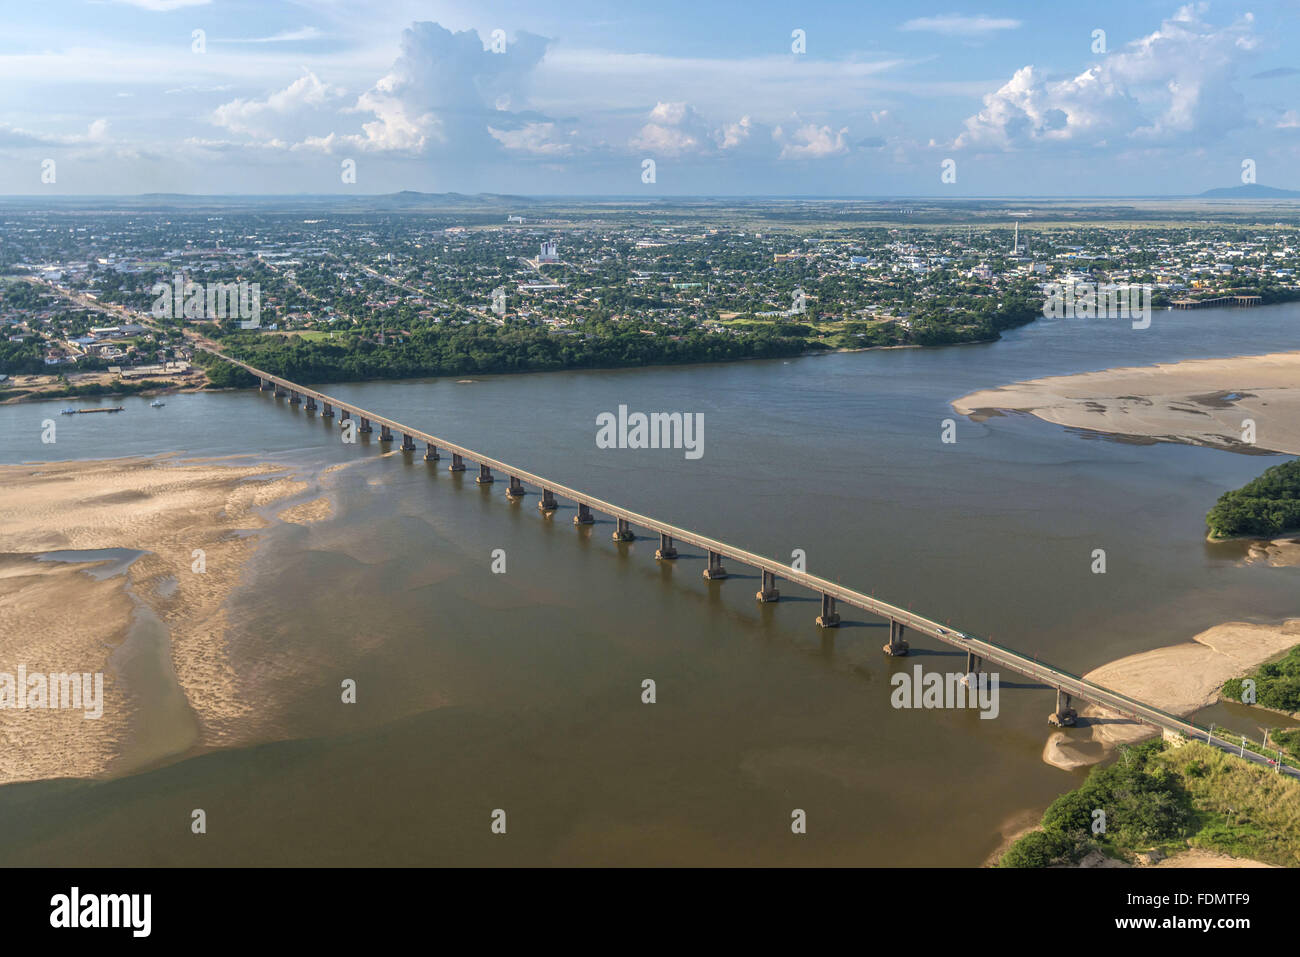 Aerial view of the Macuxis BR-401 Bridge over White River - drought period in the region Stock Photo